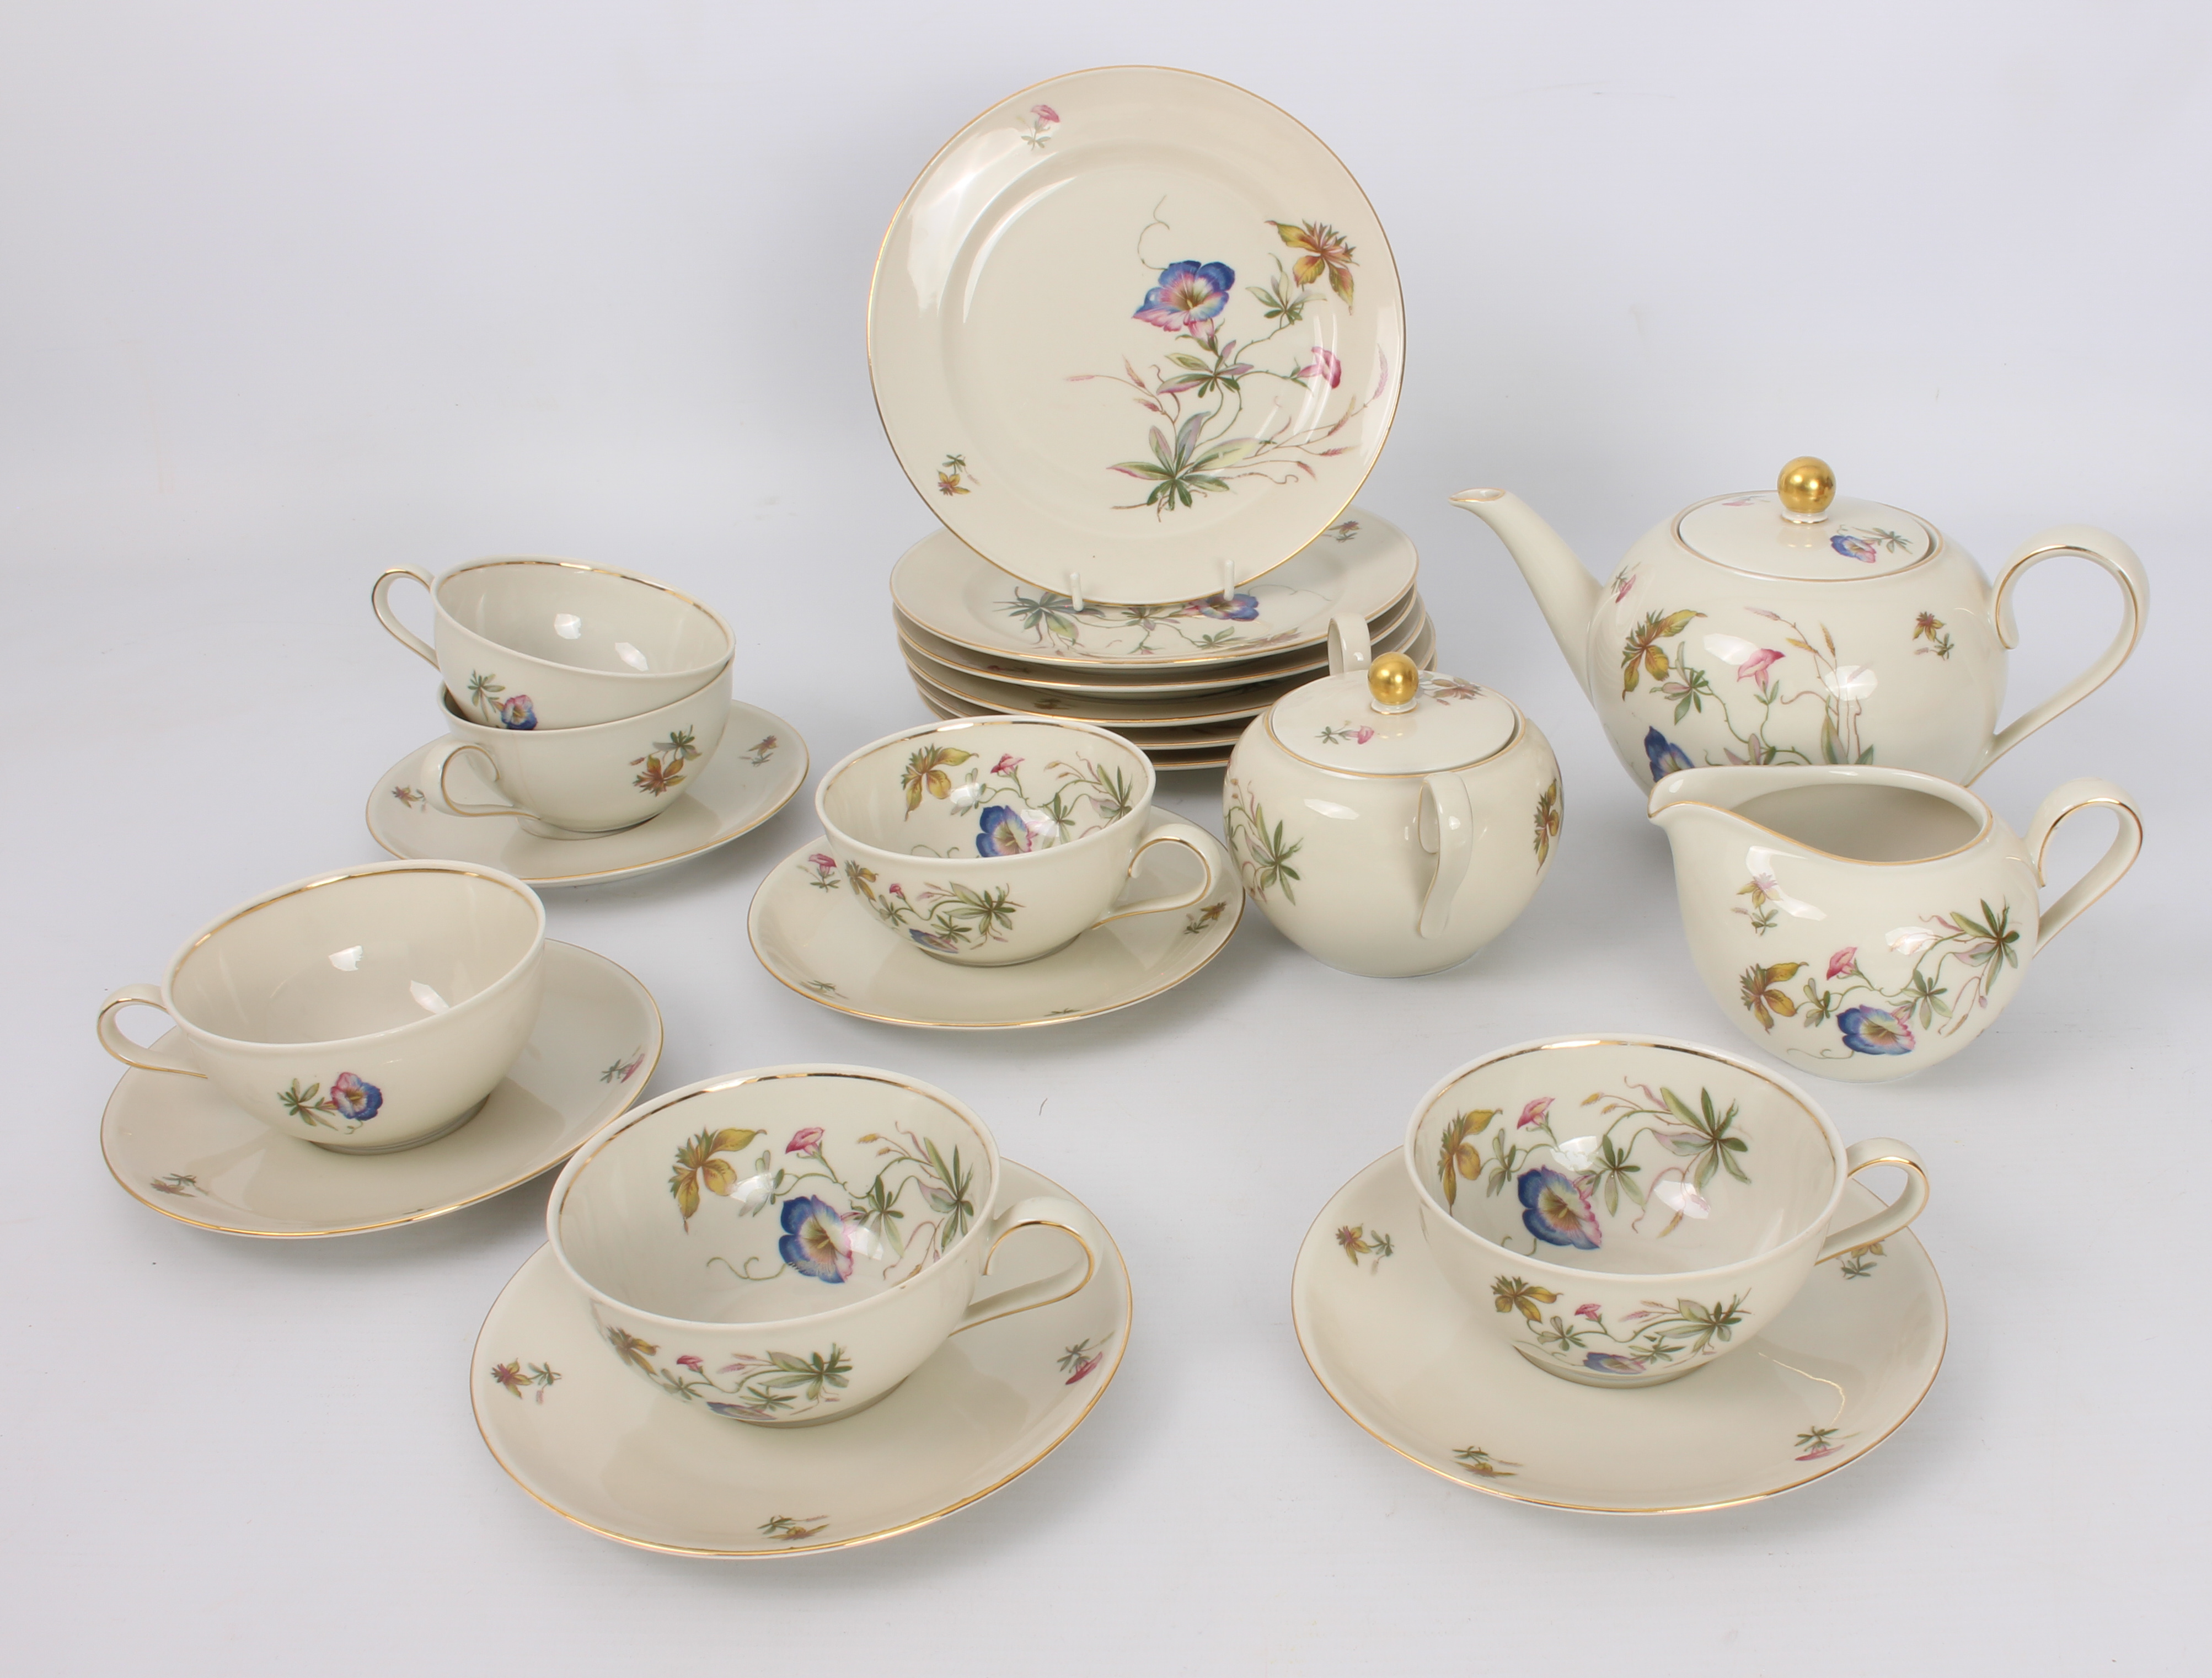 A German porcelain tea service by Rhenania of Duisdorf - 1950s-60s, comprising a teapot, two handled